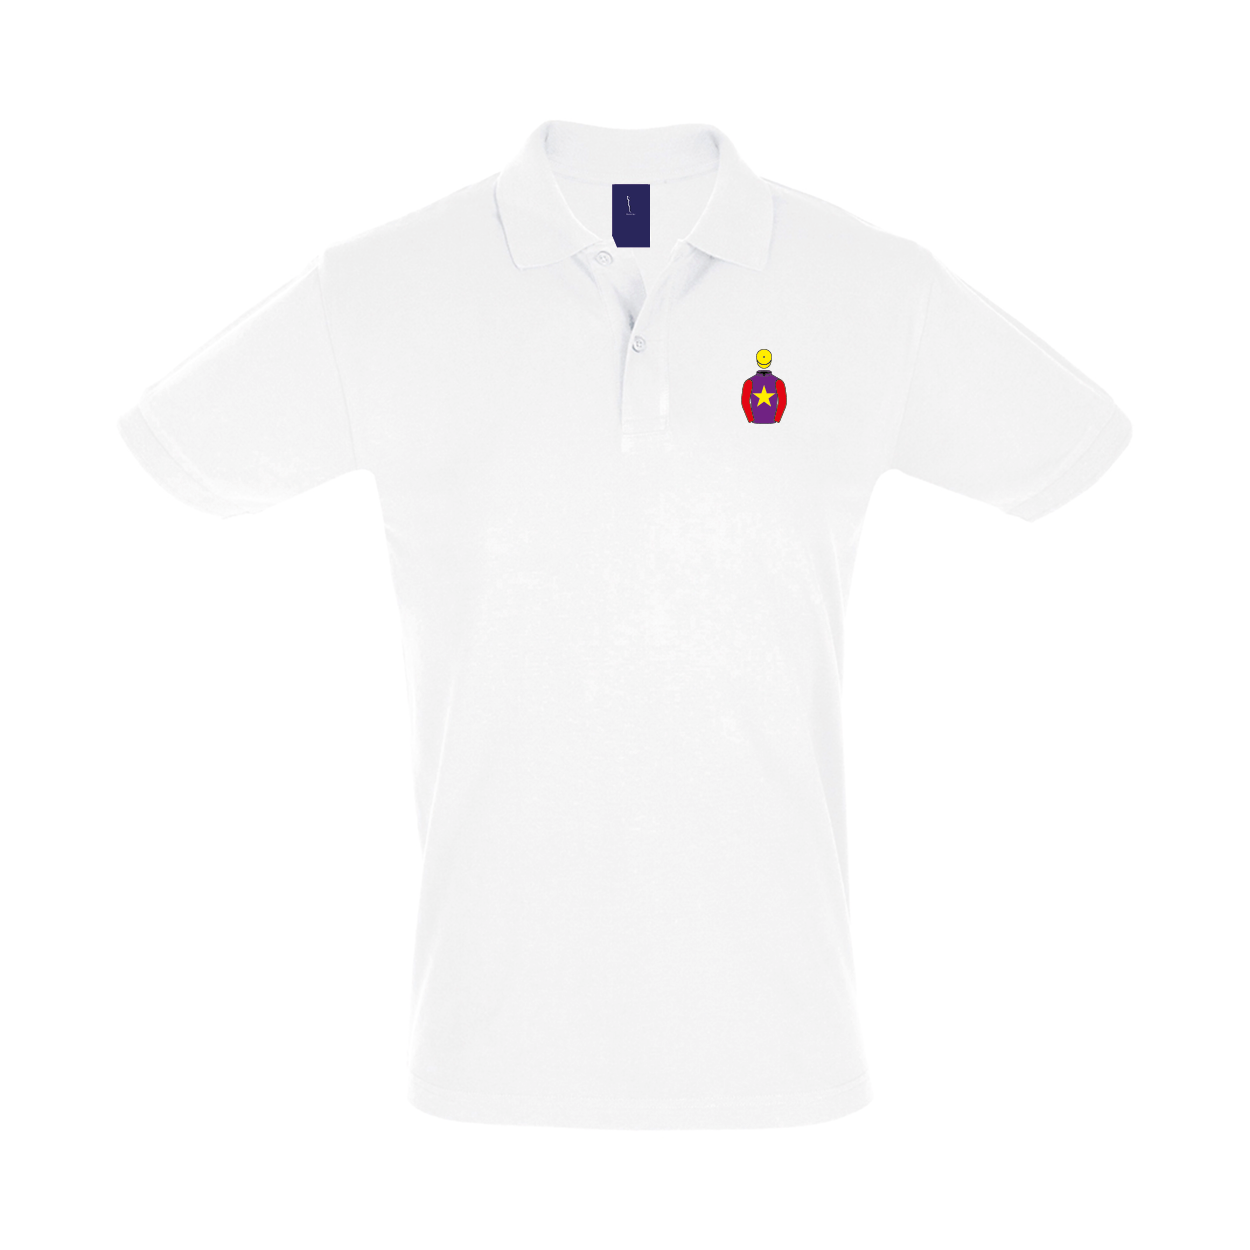 Ladies Mrs B Tully and R Lock Embroidered Polo Shirt - Clothing - Hacked Up